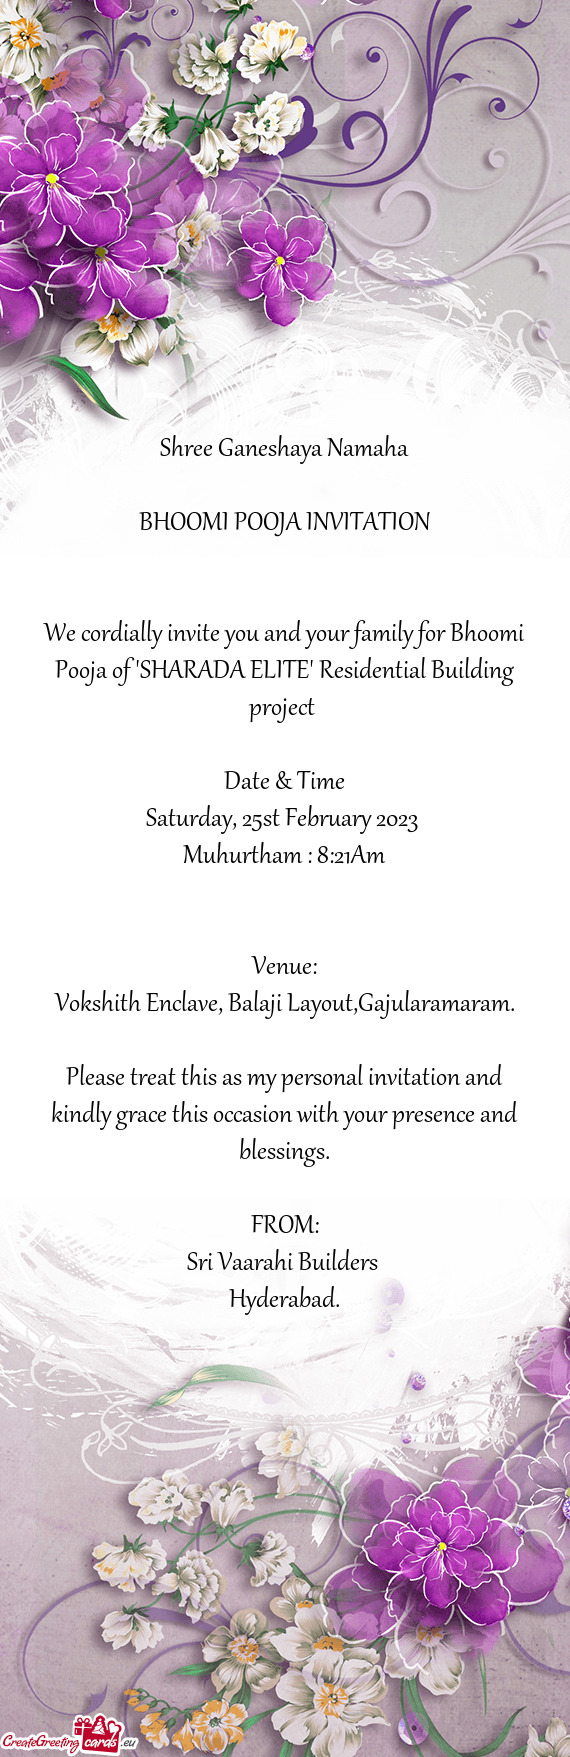 We cordially invite you and your family for Bhoomi Pooja of "SHARADA ELITE" Residential Building pro